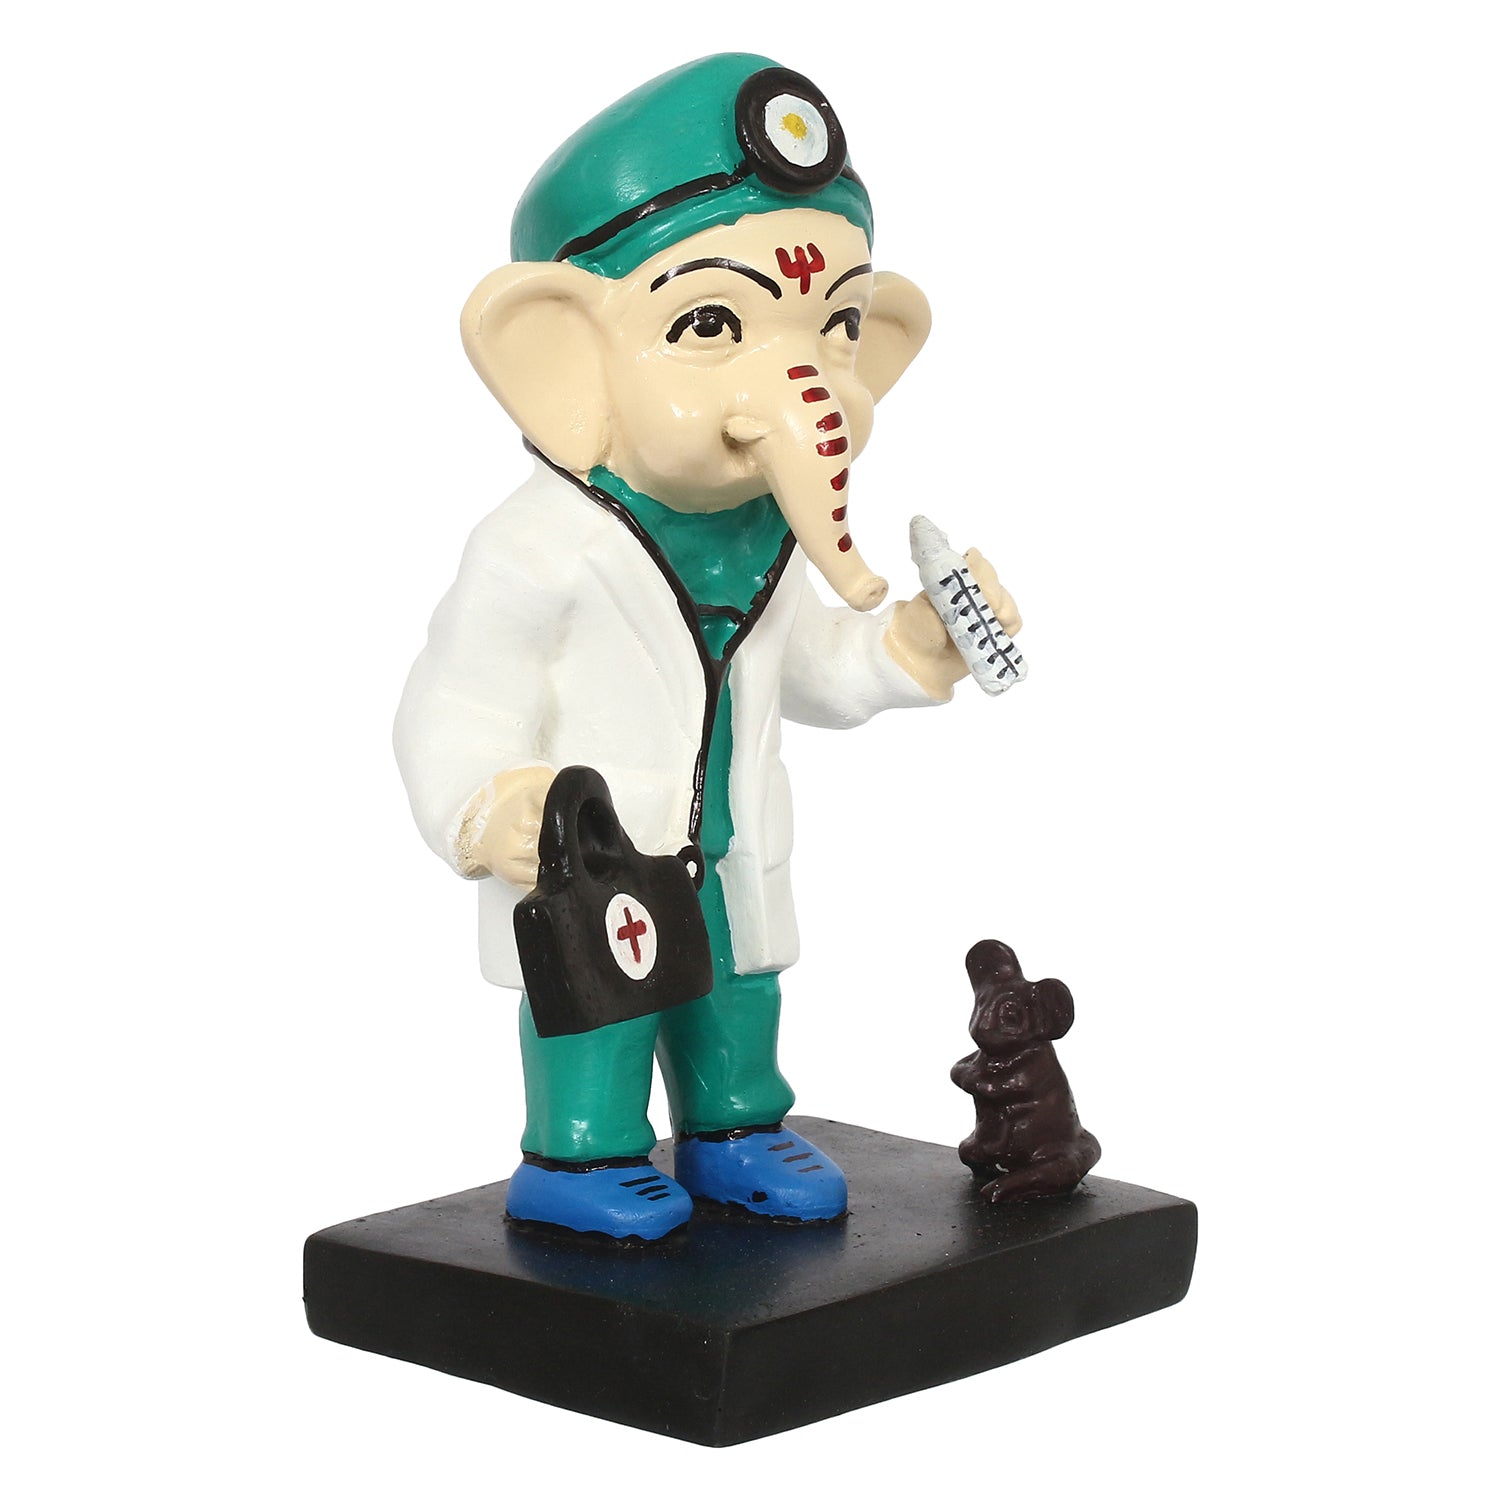 Polyresin Decorative Lord Ganesha Idol in Doctor Avatar (Green, White, Black and Blue) 4